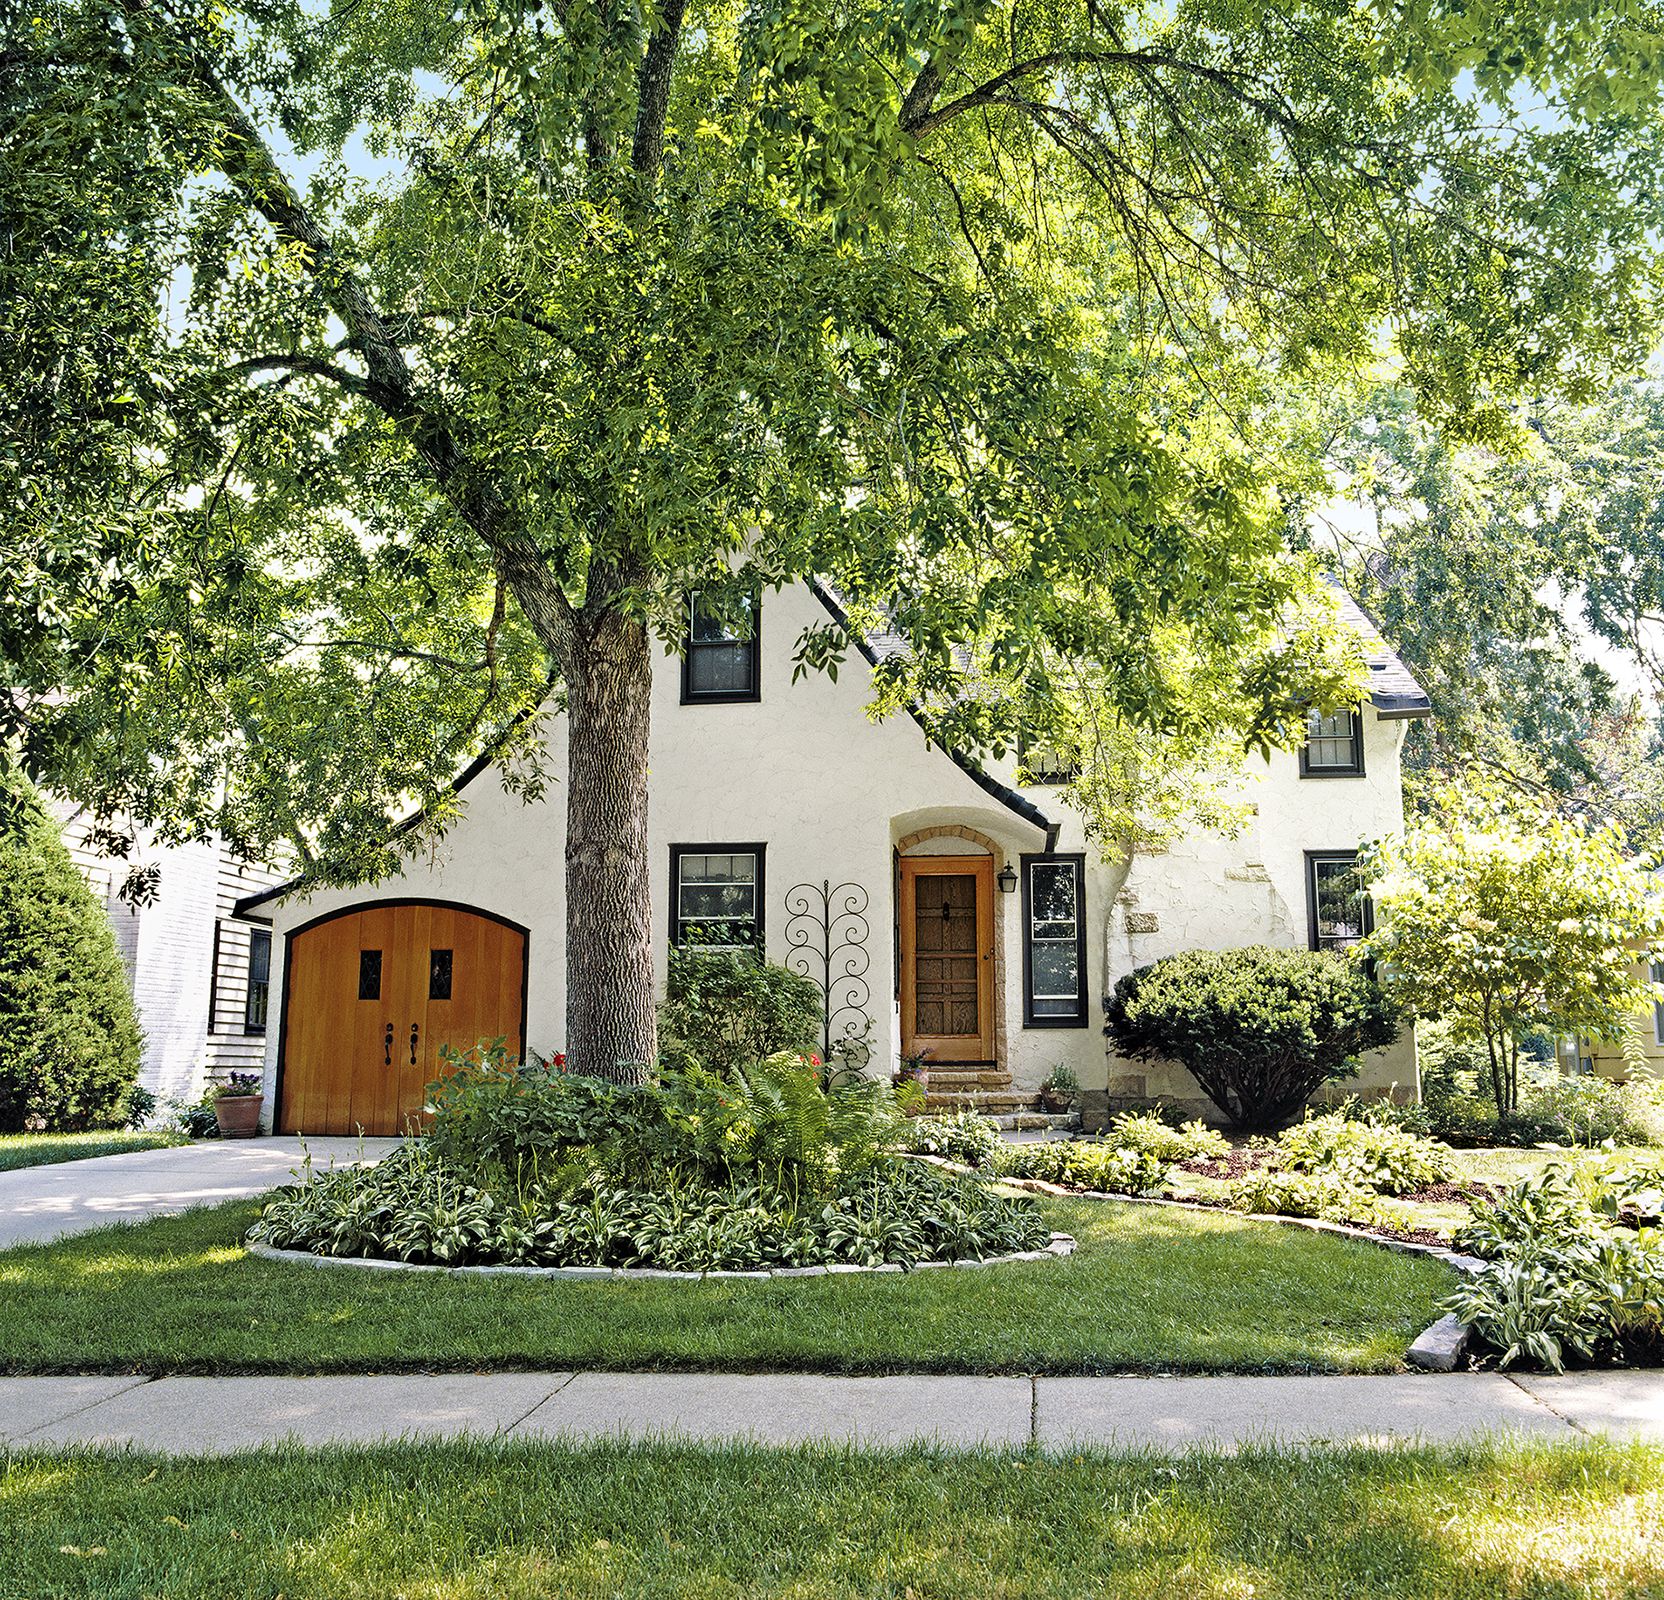 All About Shade Trees - Old This House